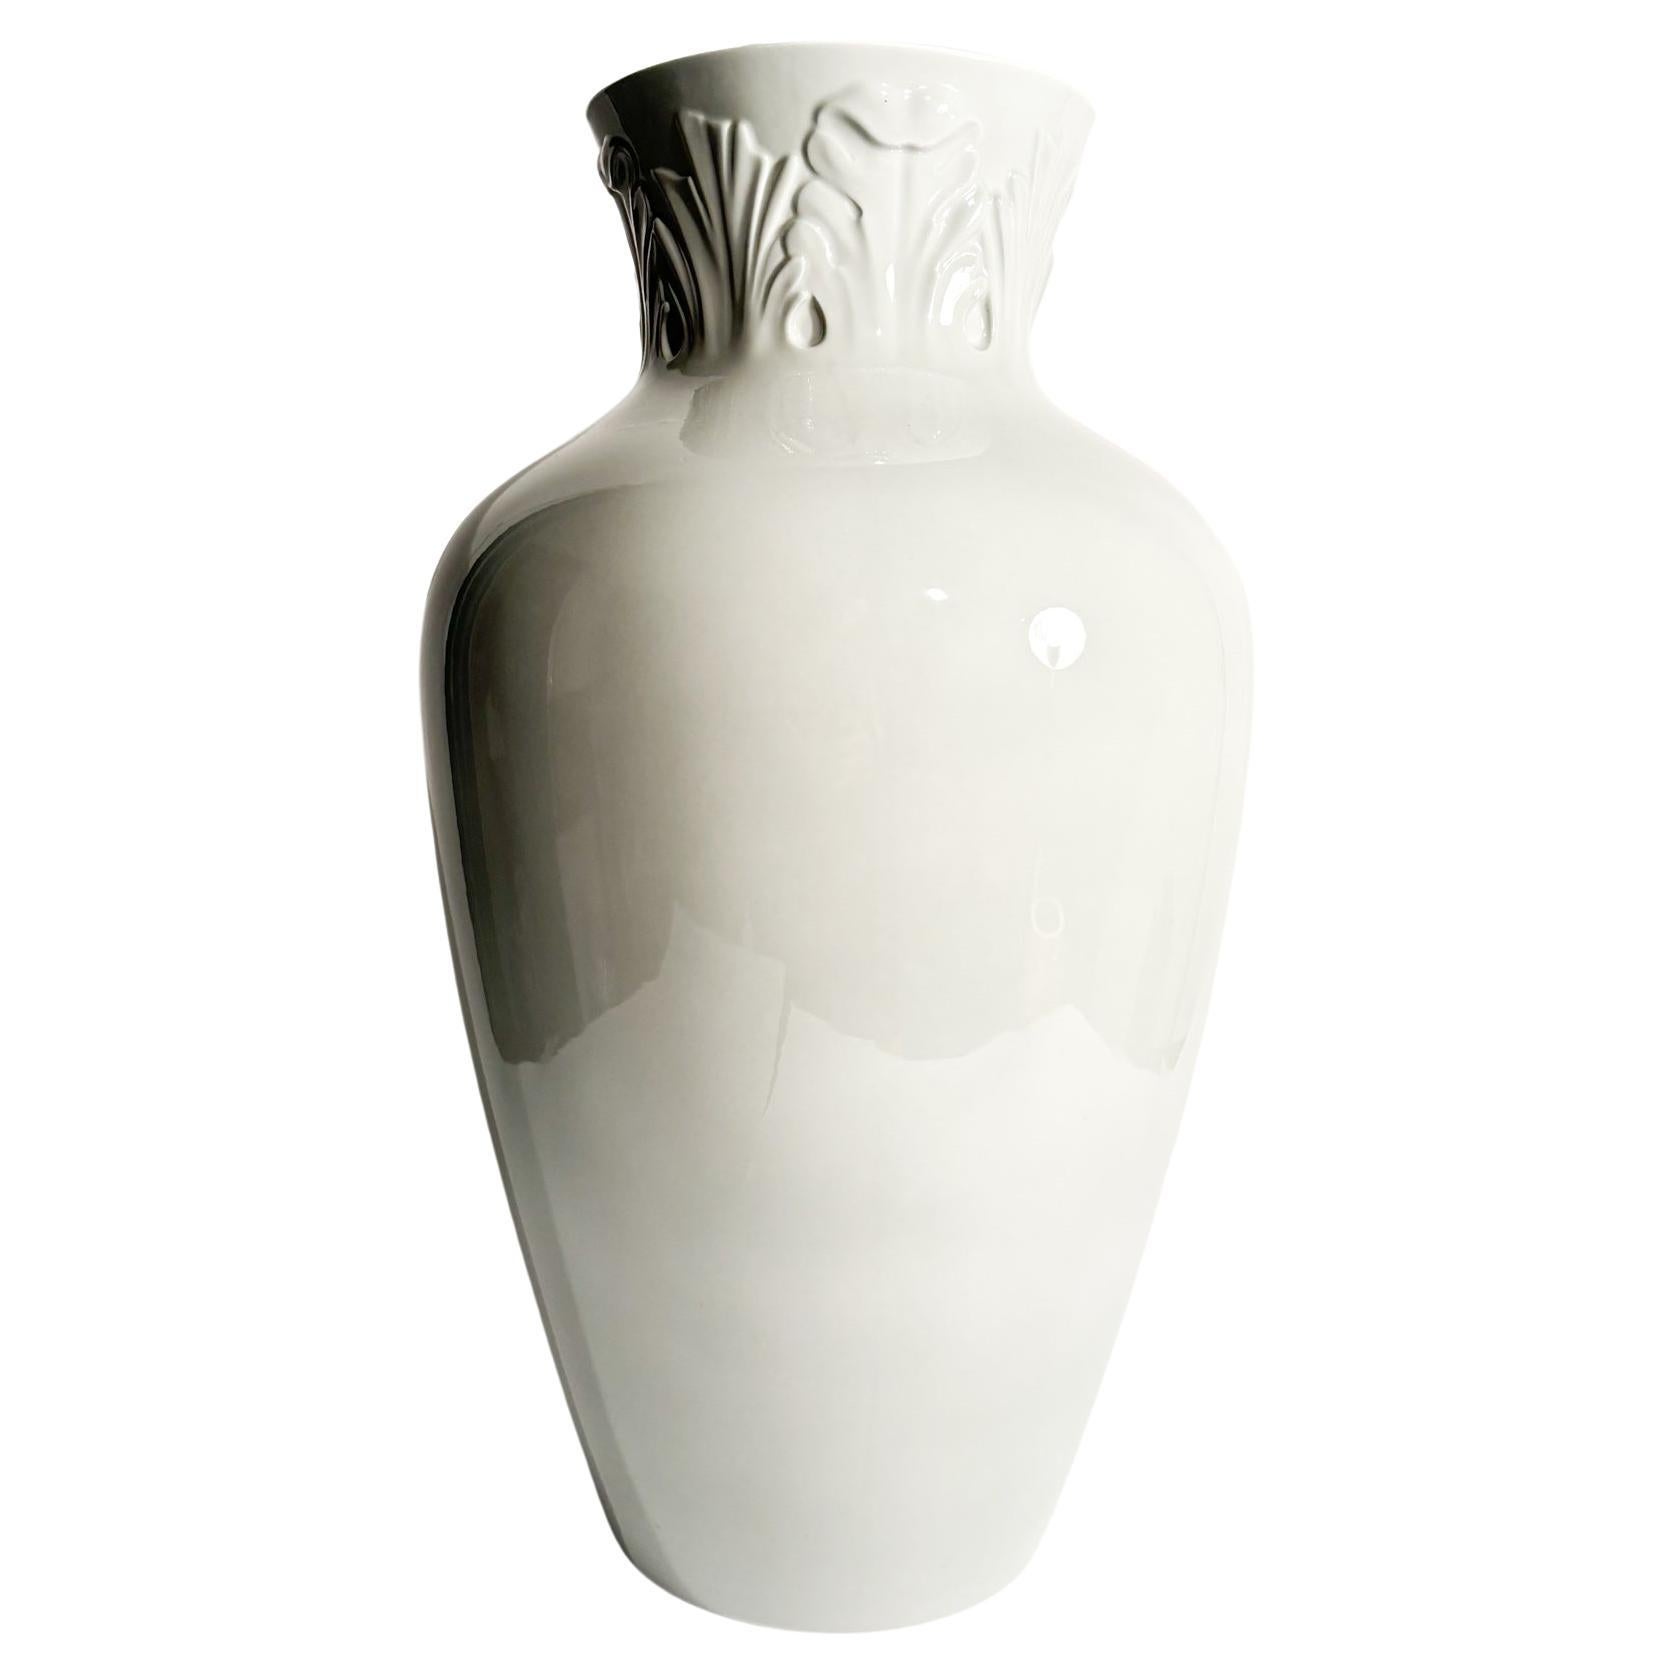 Porcelain Vase by Richard Ginori Gray 'Manifattura 1946' from the 1990s For Sale